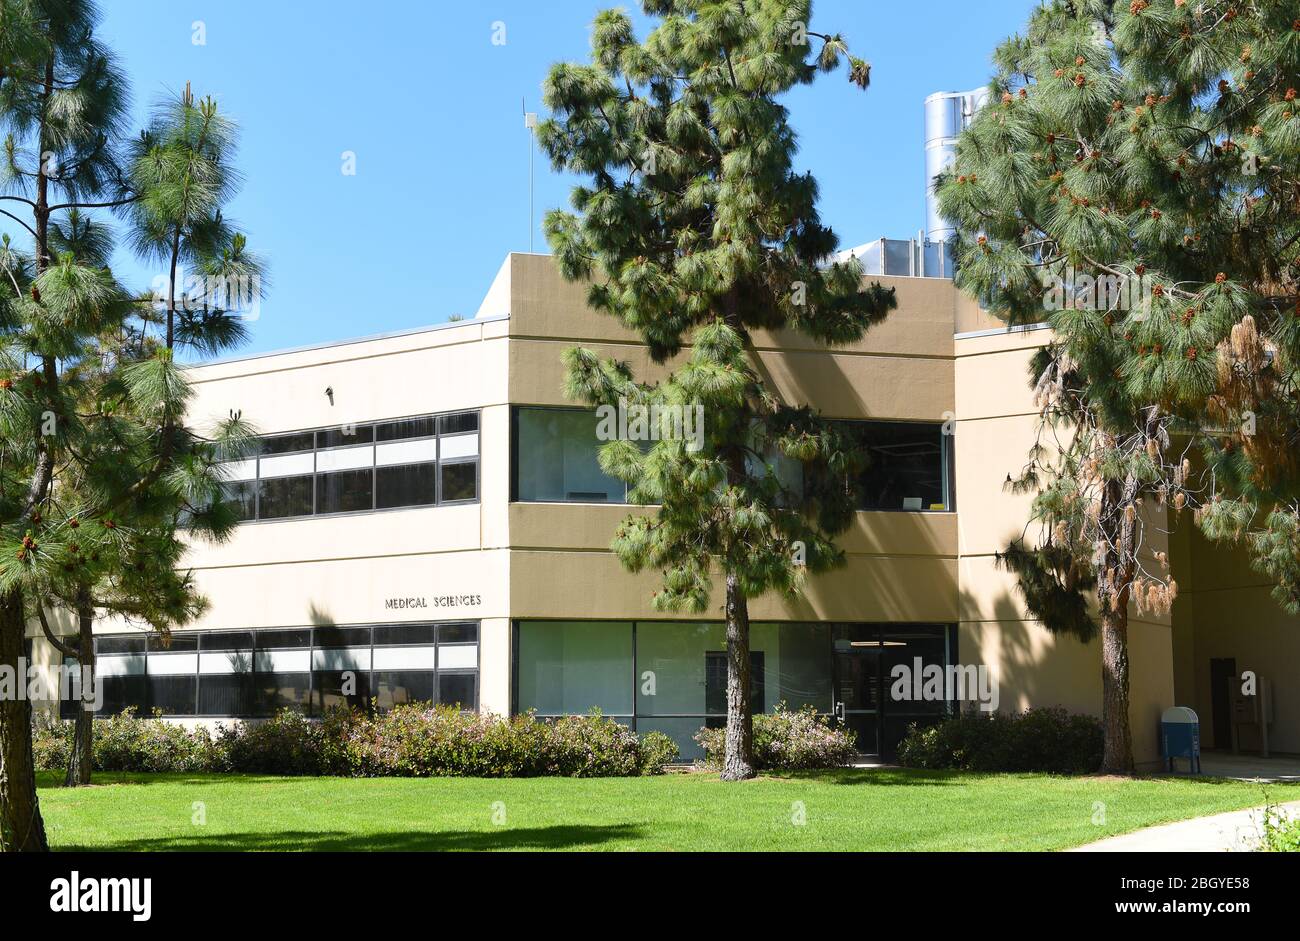 IRVINE, CALIFORNIA - 22 APRIL 2020:  The Medical Sciences building on the Campus of the University of California Irvine, UCI. Stock Photo